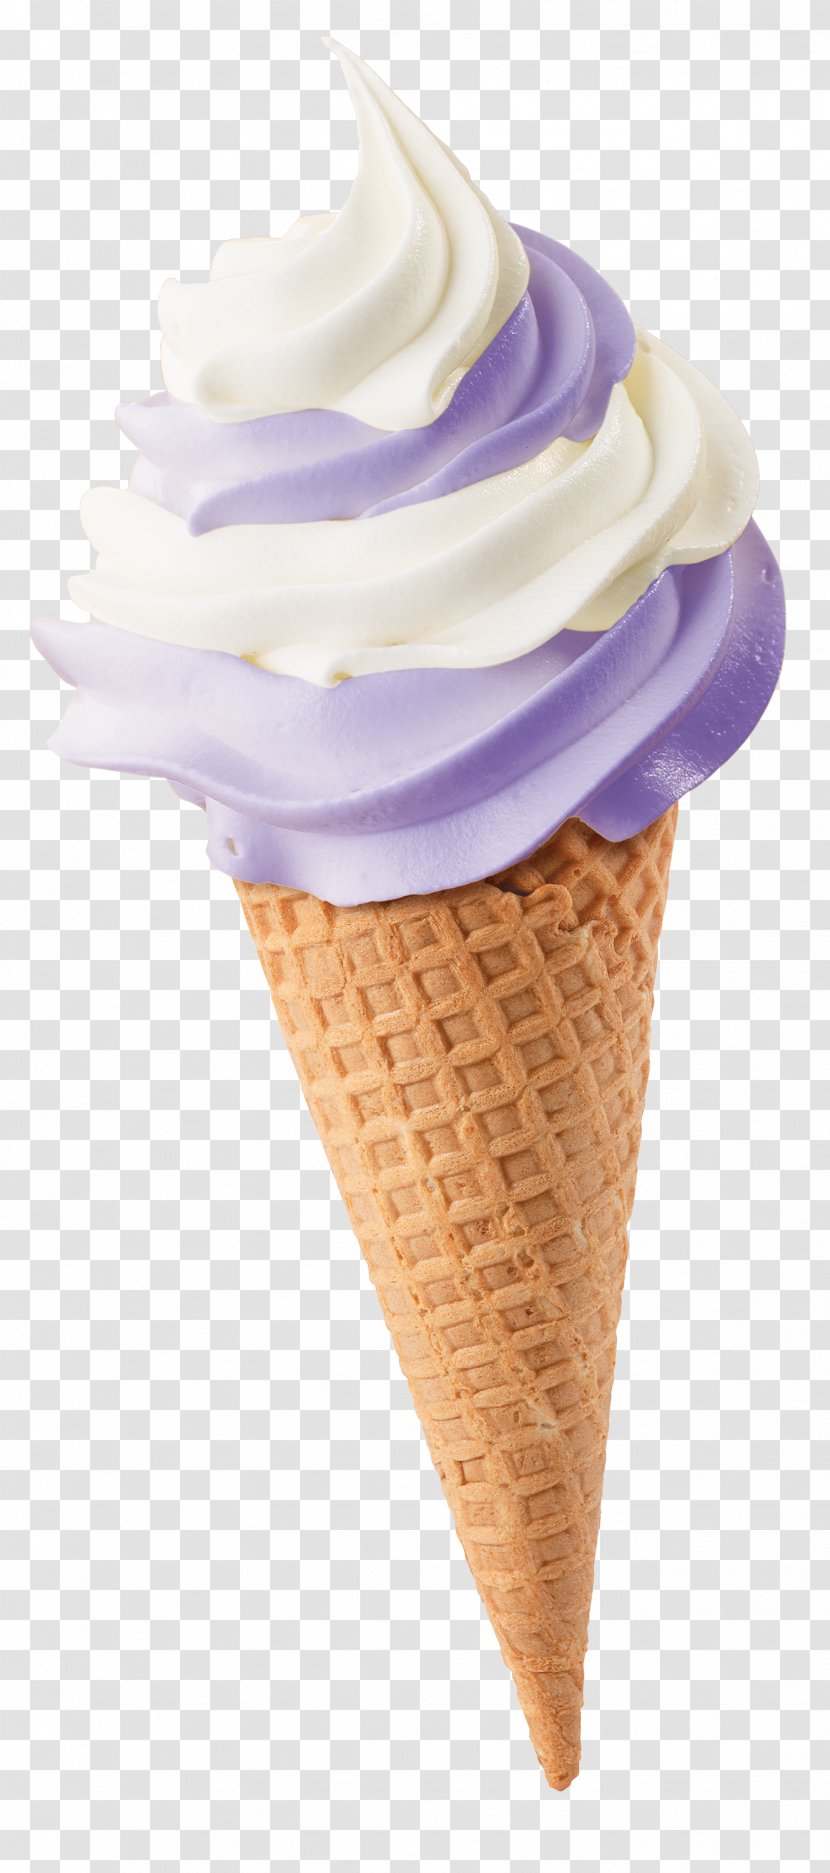 Ice Cream Cones Ube Halaya Northeast Regional Conference Love - Convenience Store Card Transparent PNG